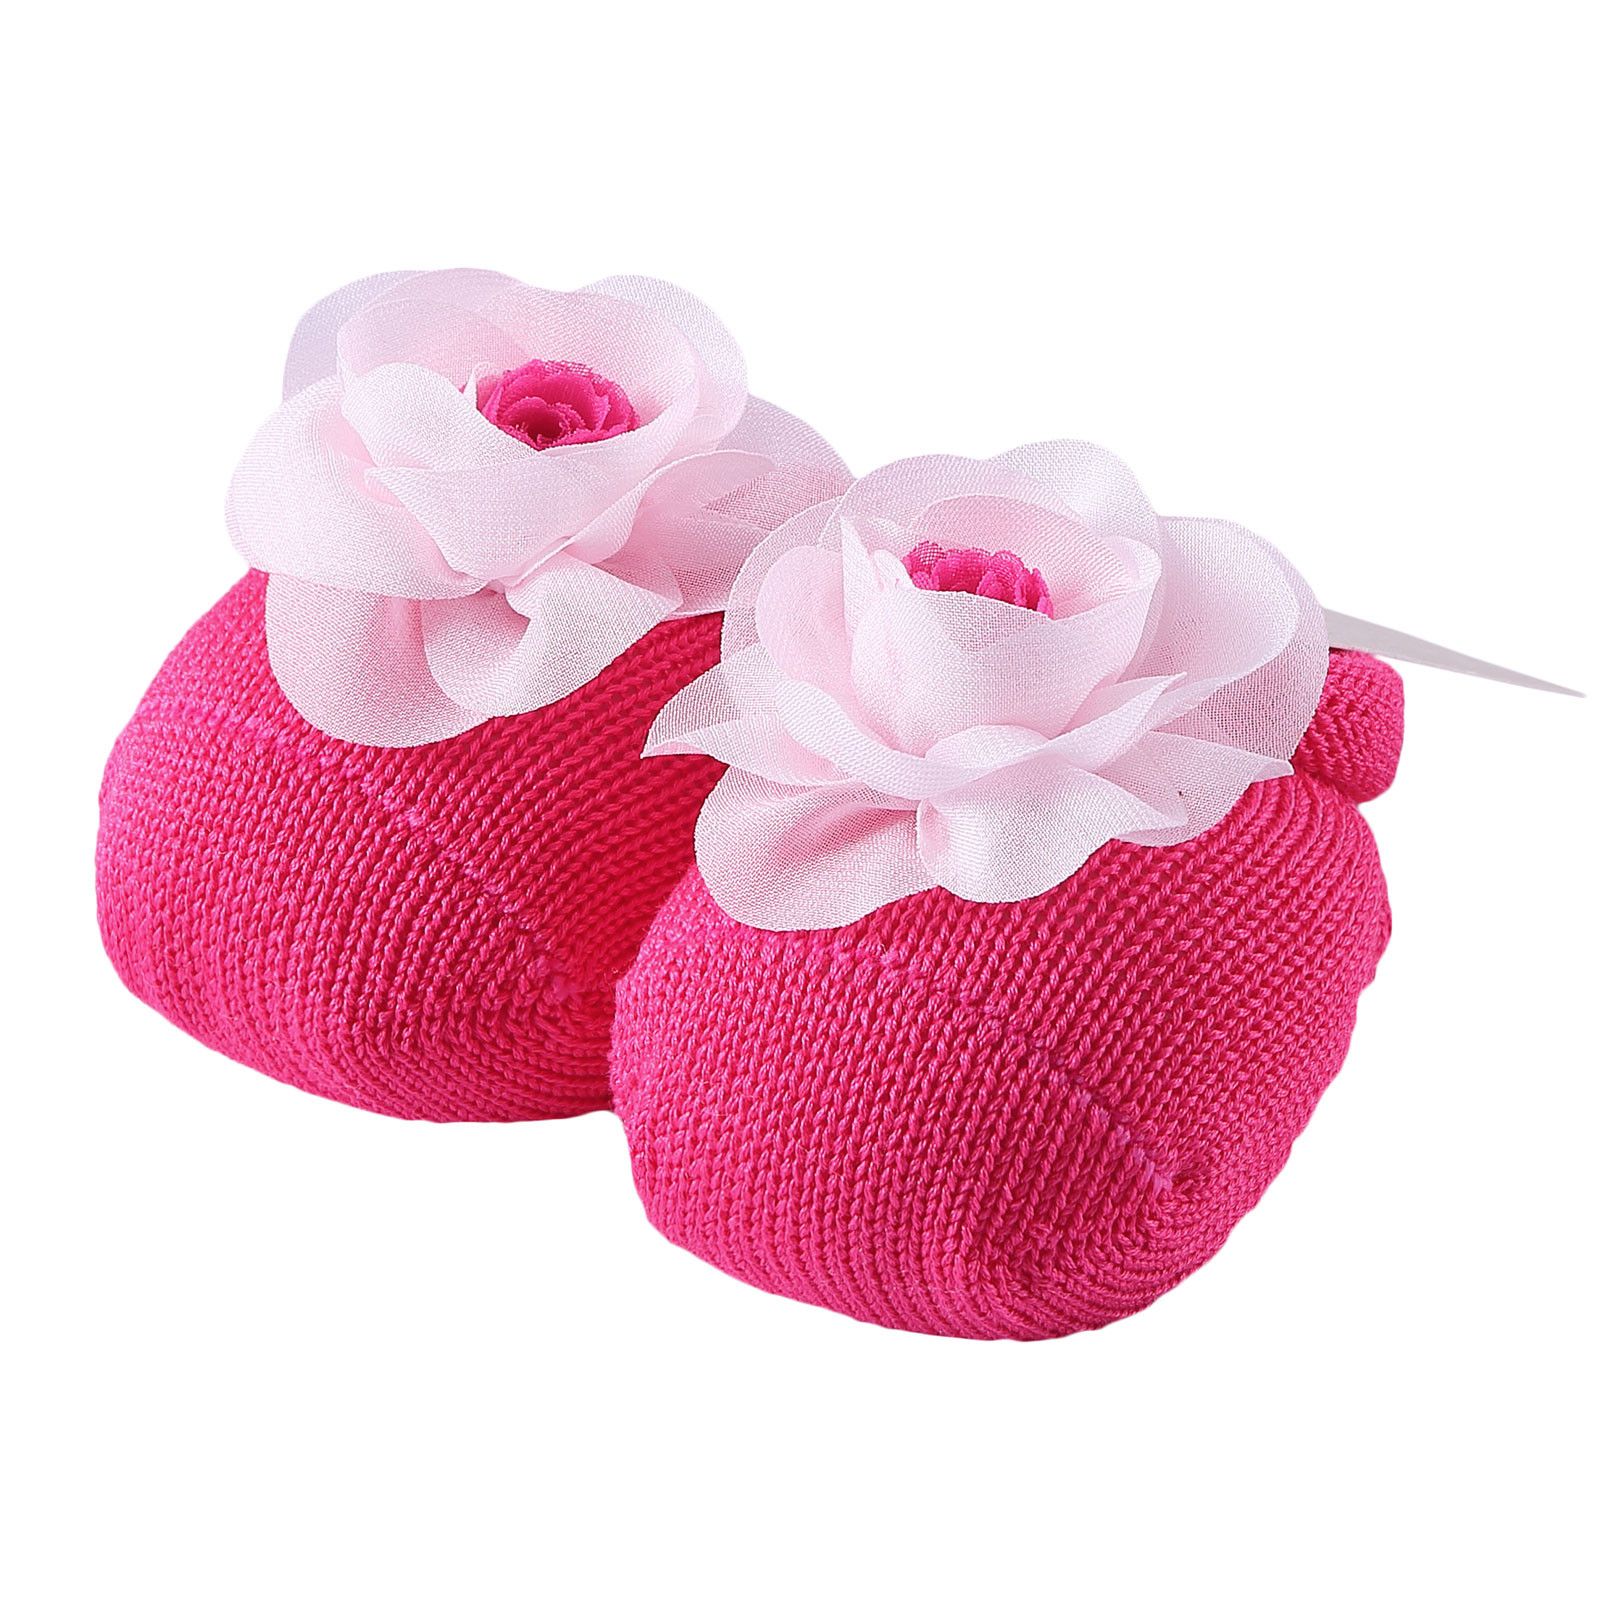 Baby Red Knitted Cotton Rose Shoes&Hair Band Gift Set - CÉMAROSE | Children's Fashion Store - 2